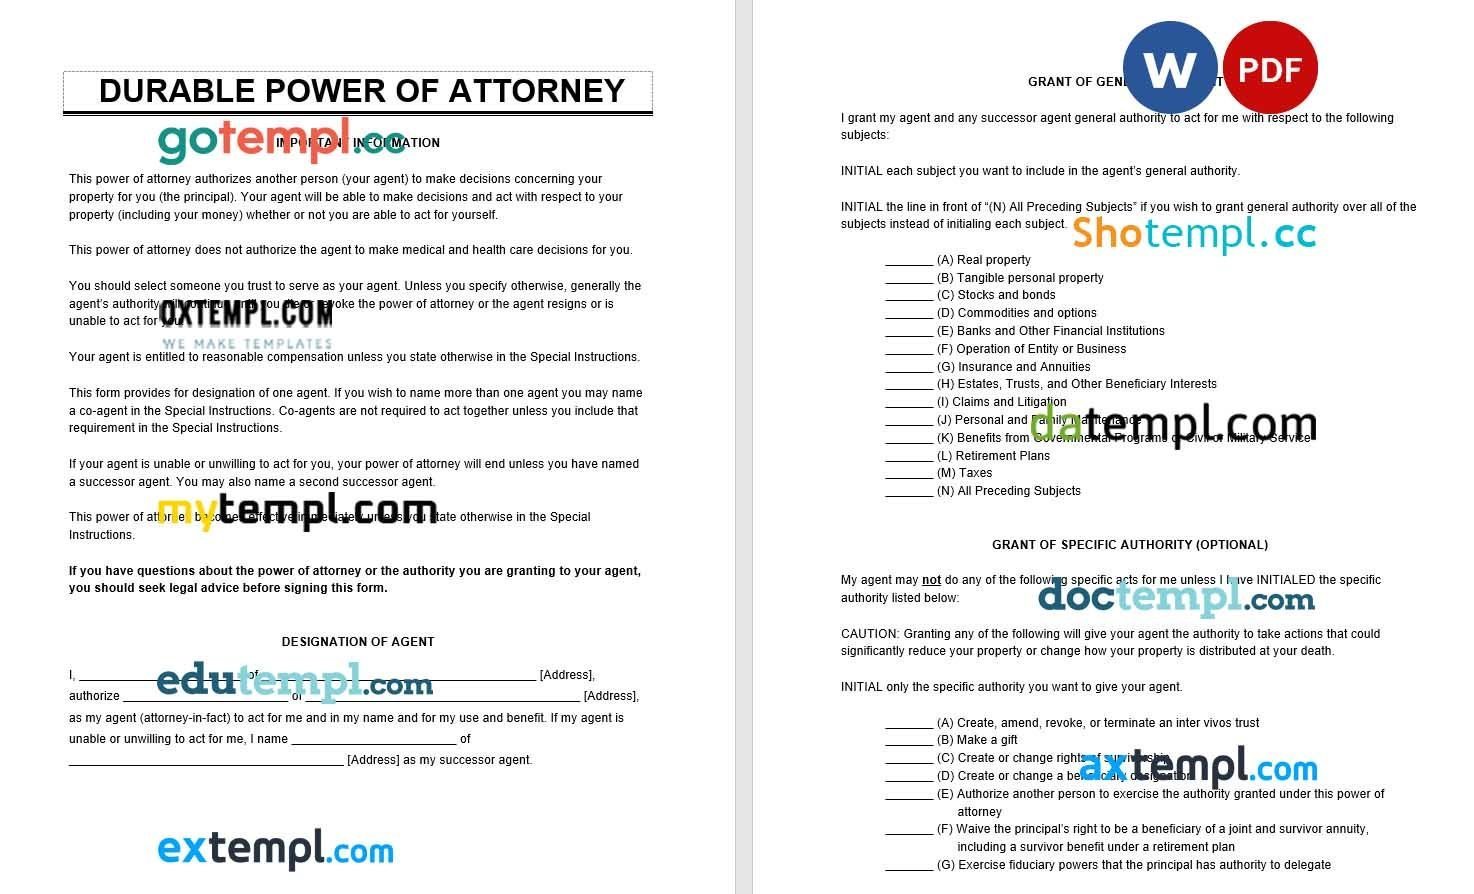 Durable Power of Attorney example, fully editable